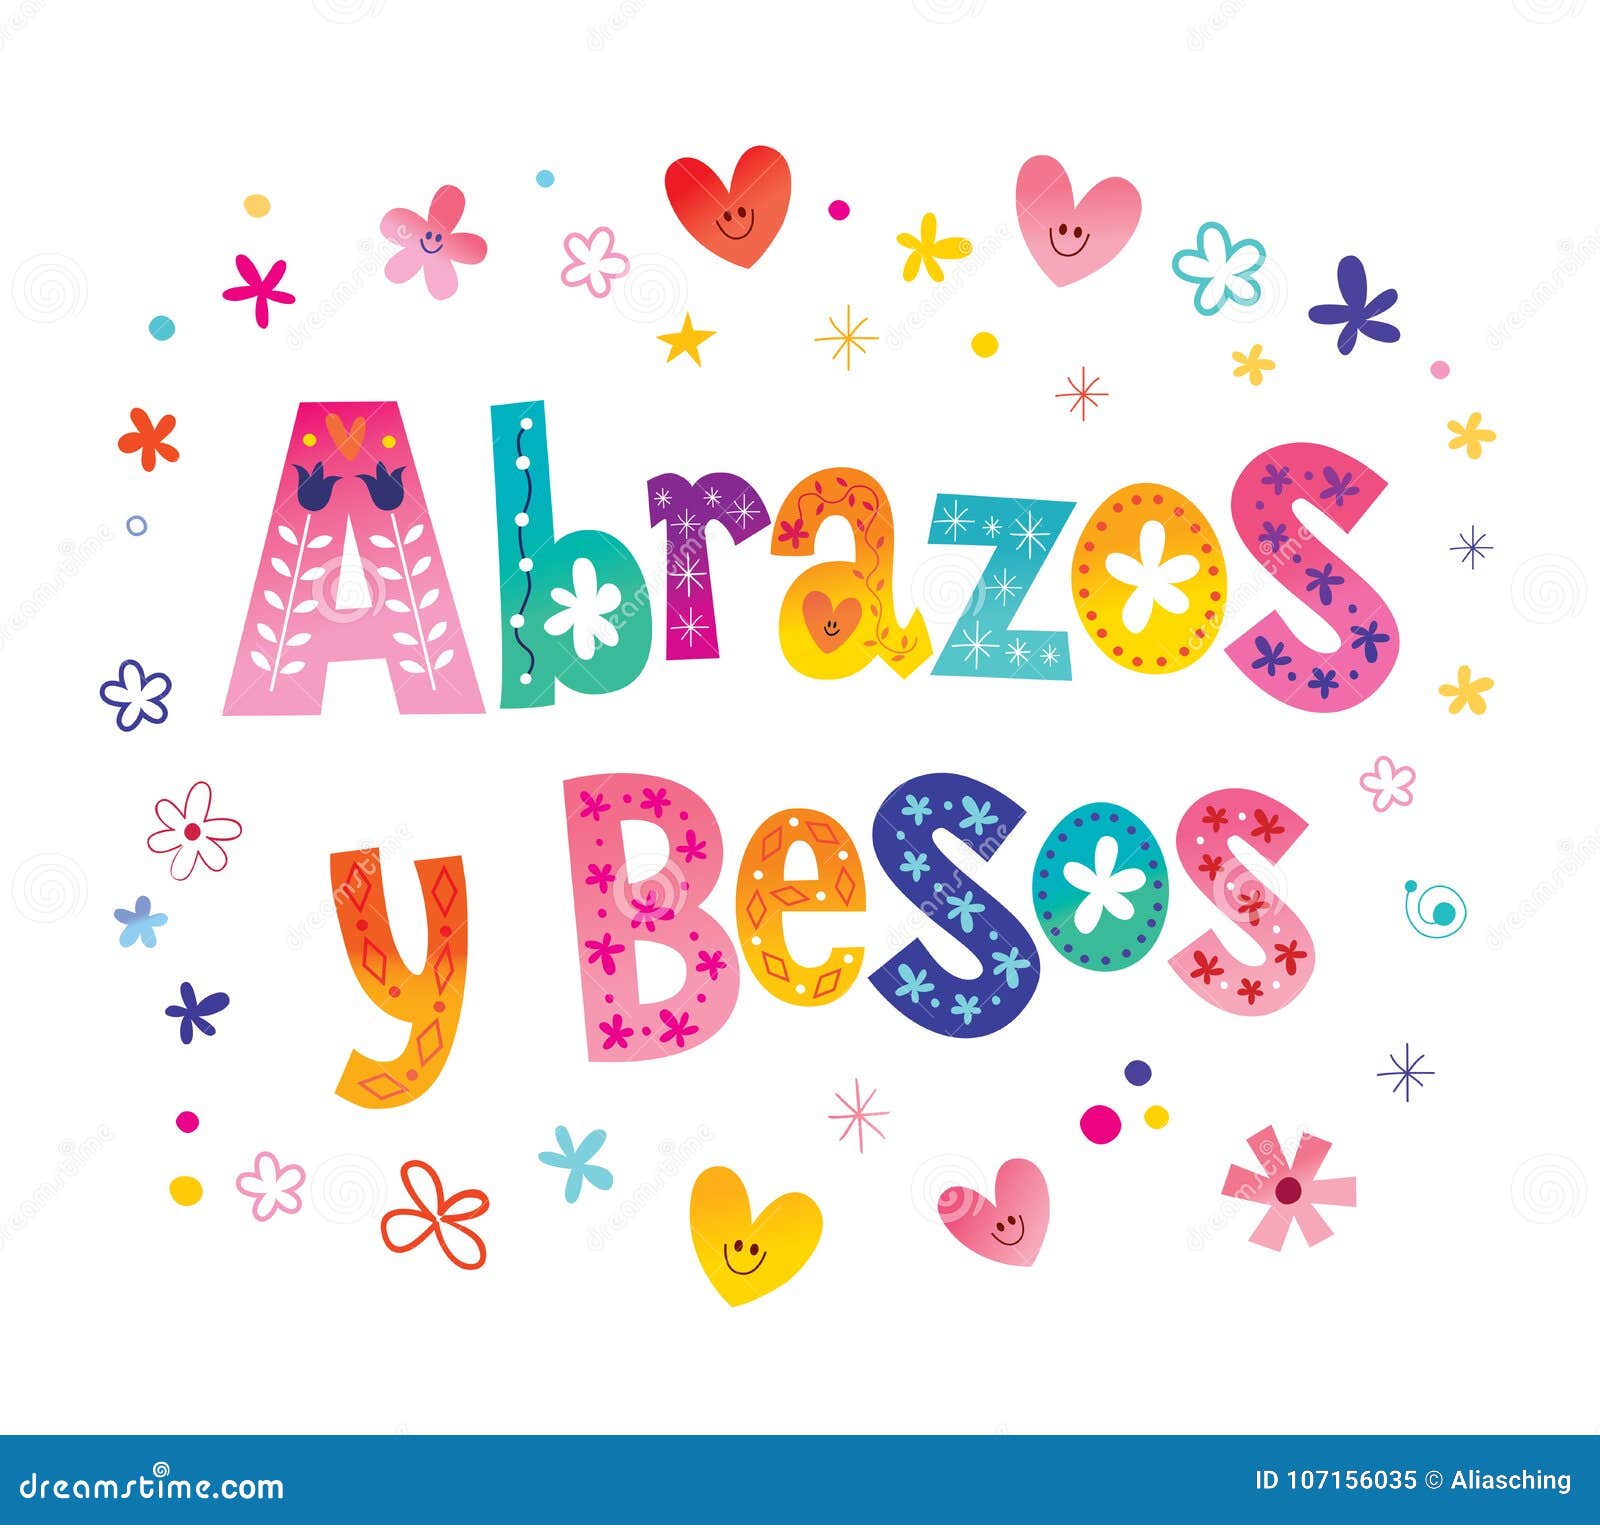 abrazos y besos hugs and kisses in spanish